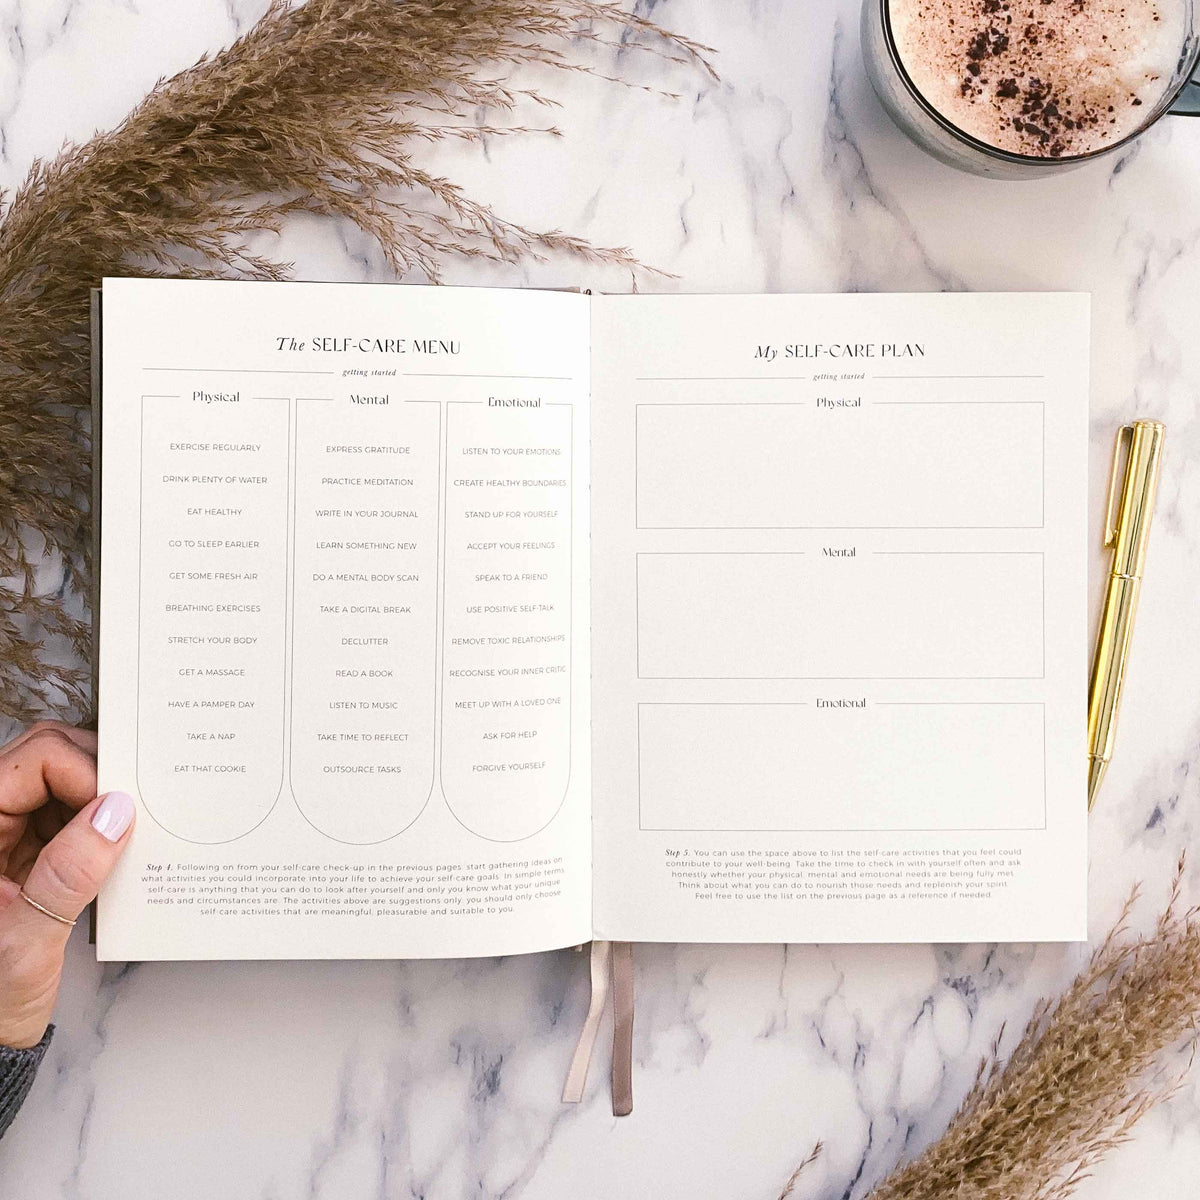 My Daily Self-Care Gratitude & Reflection Journal